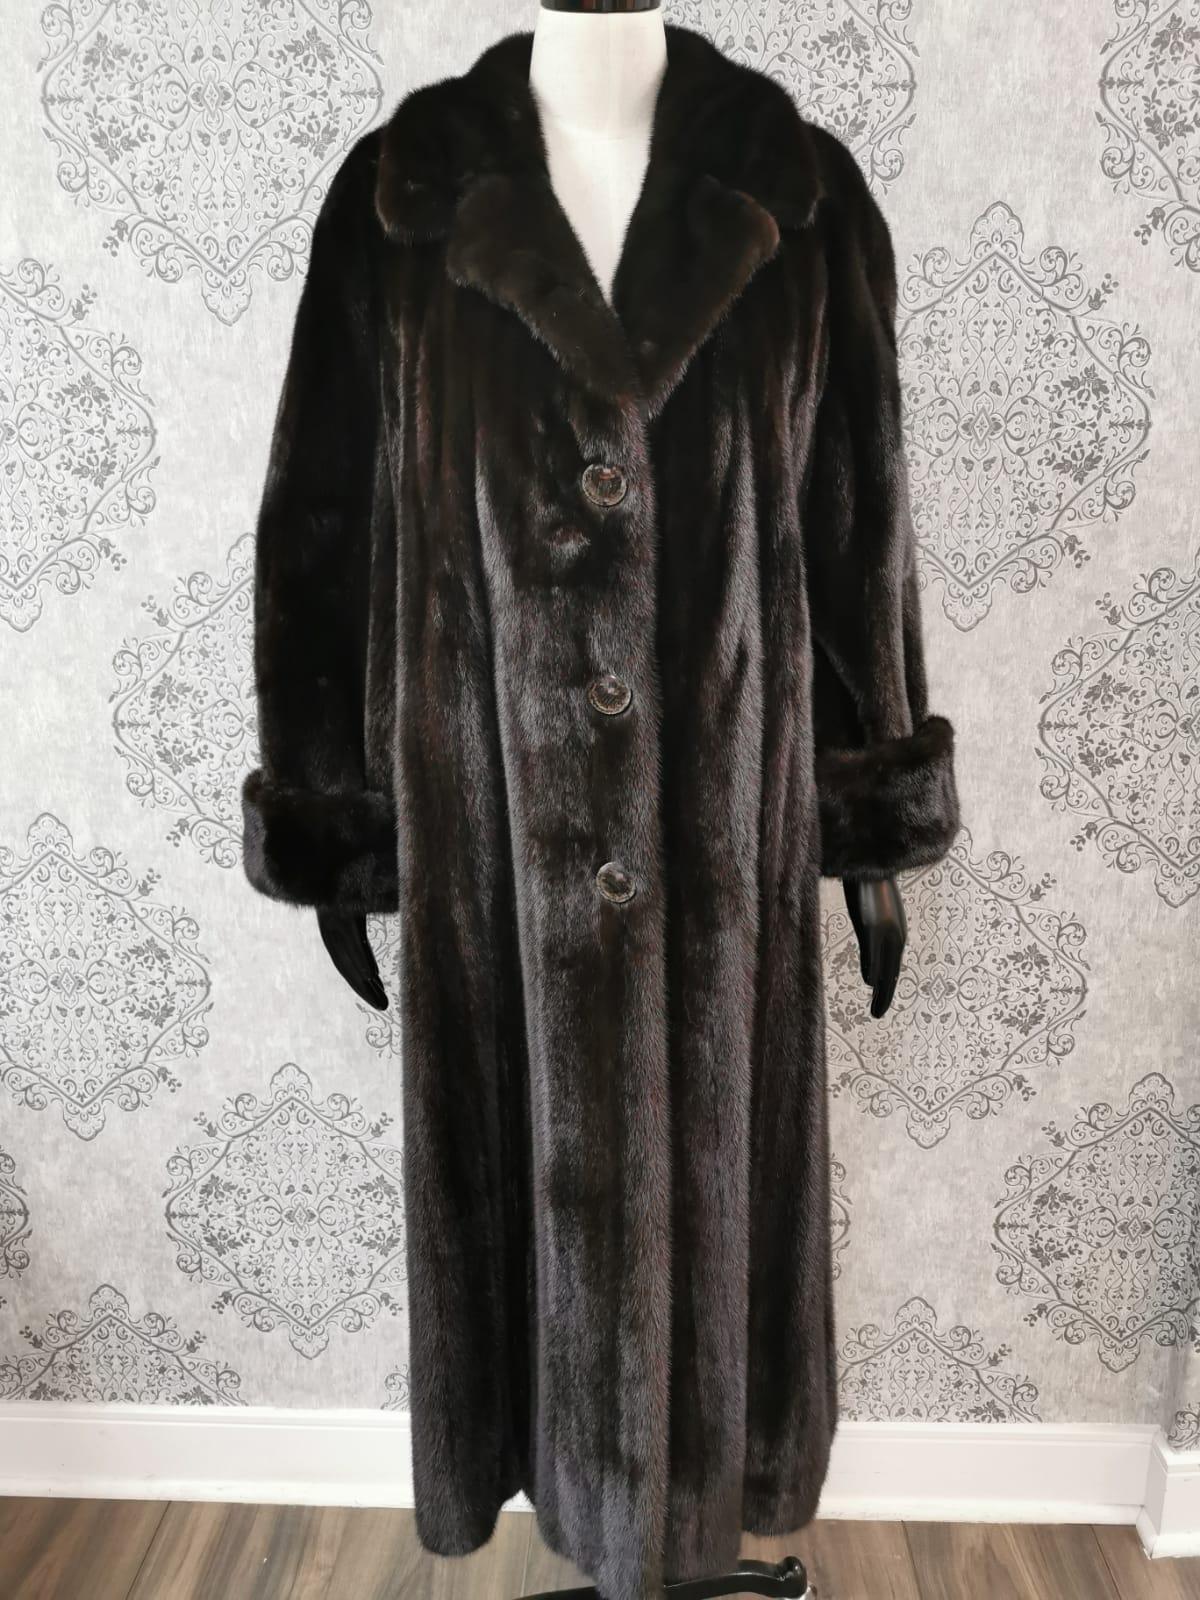 PRODUCT DESCRIPTION:

Birger Christensen Ranch female mink fur full length trench coat with long sleeves that can be rolled and gracious sweep

Condition: New

Closure: Buttons

Color: Dark Mahogany

Material: Ranch Mink

Garment type: Trench